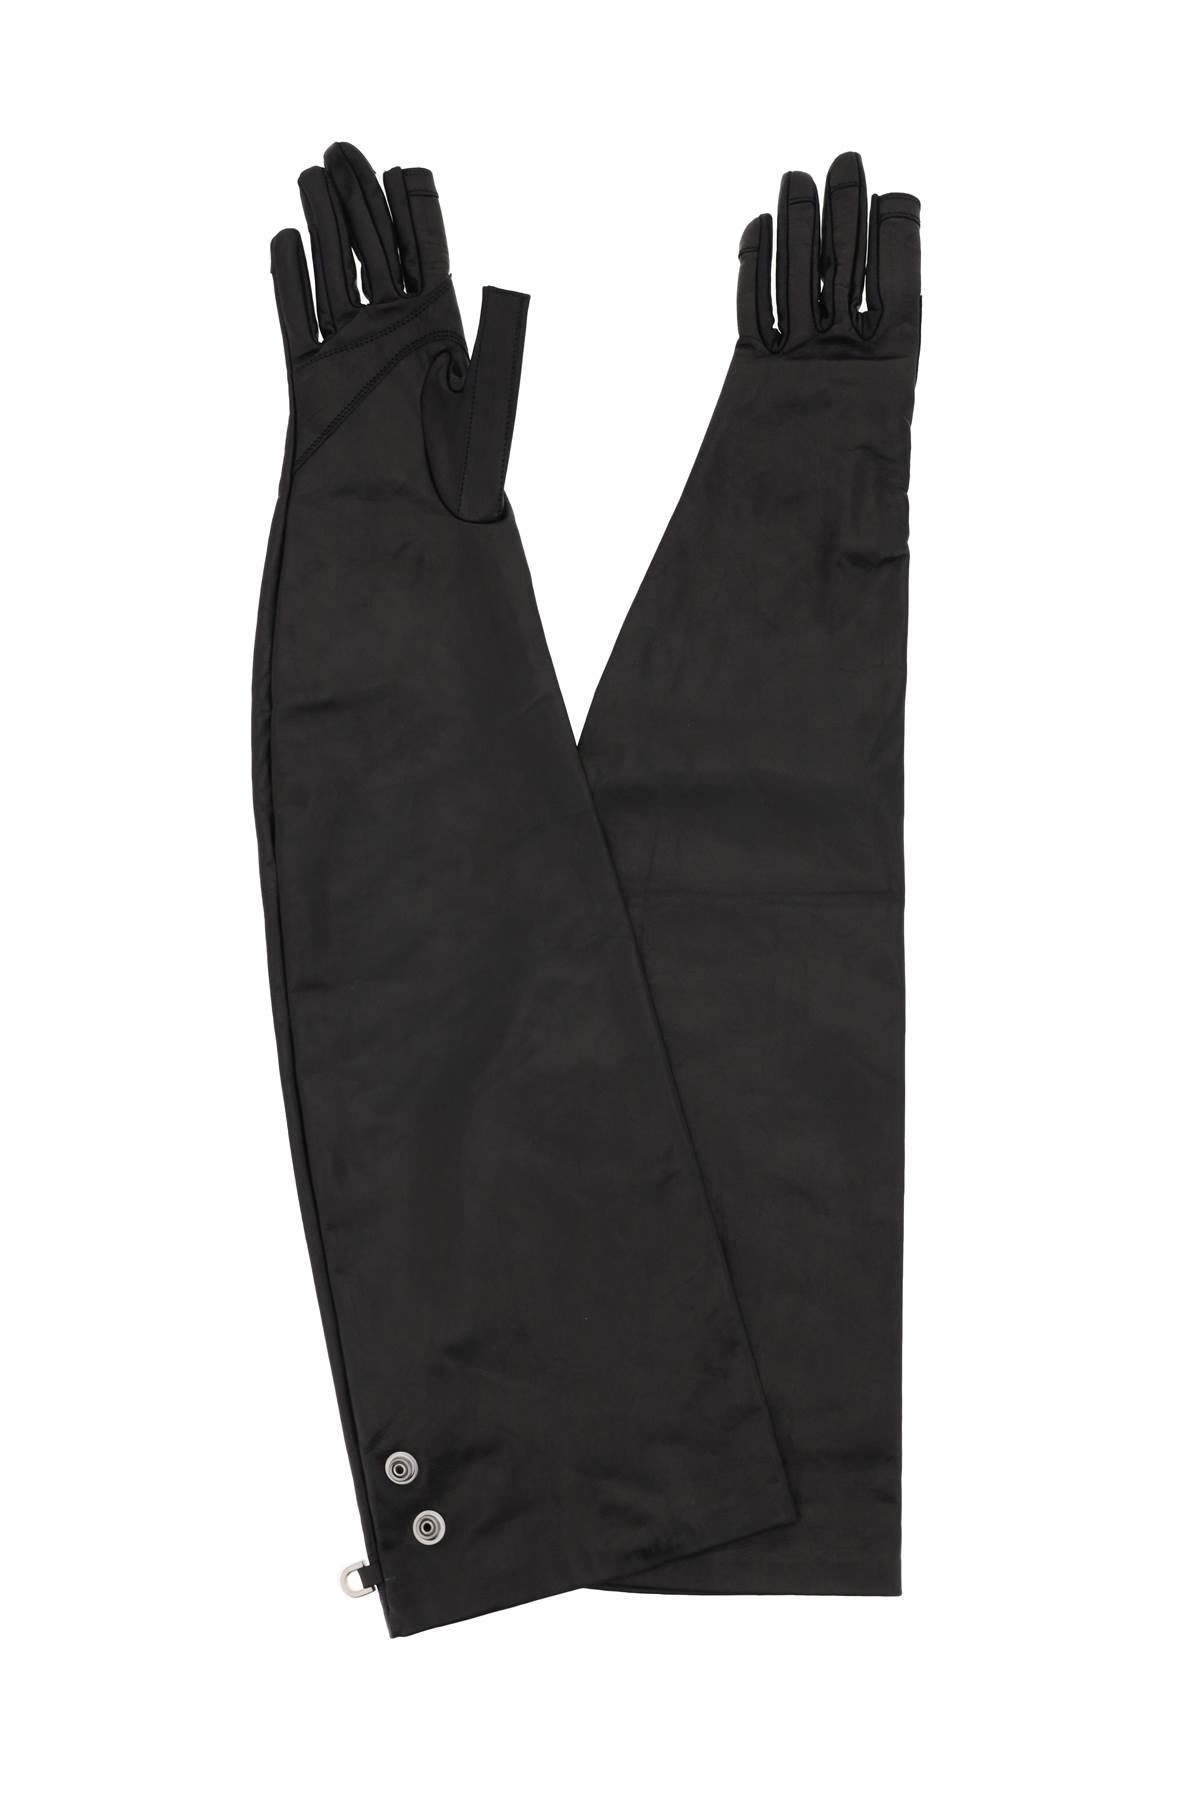 RICK OWENS Stylish and Functional Black Leather Long Gloves for Women – FW23 Collection